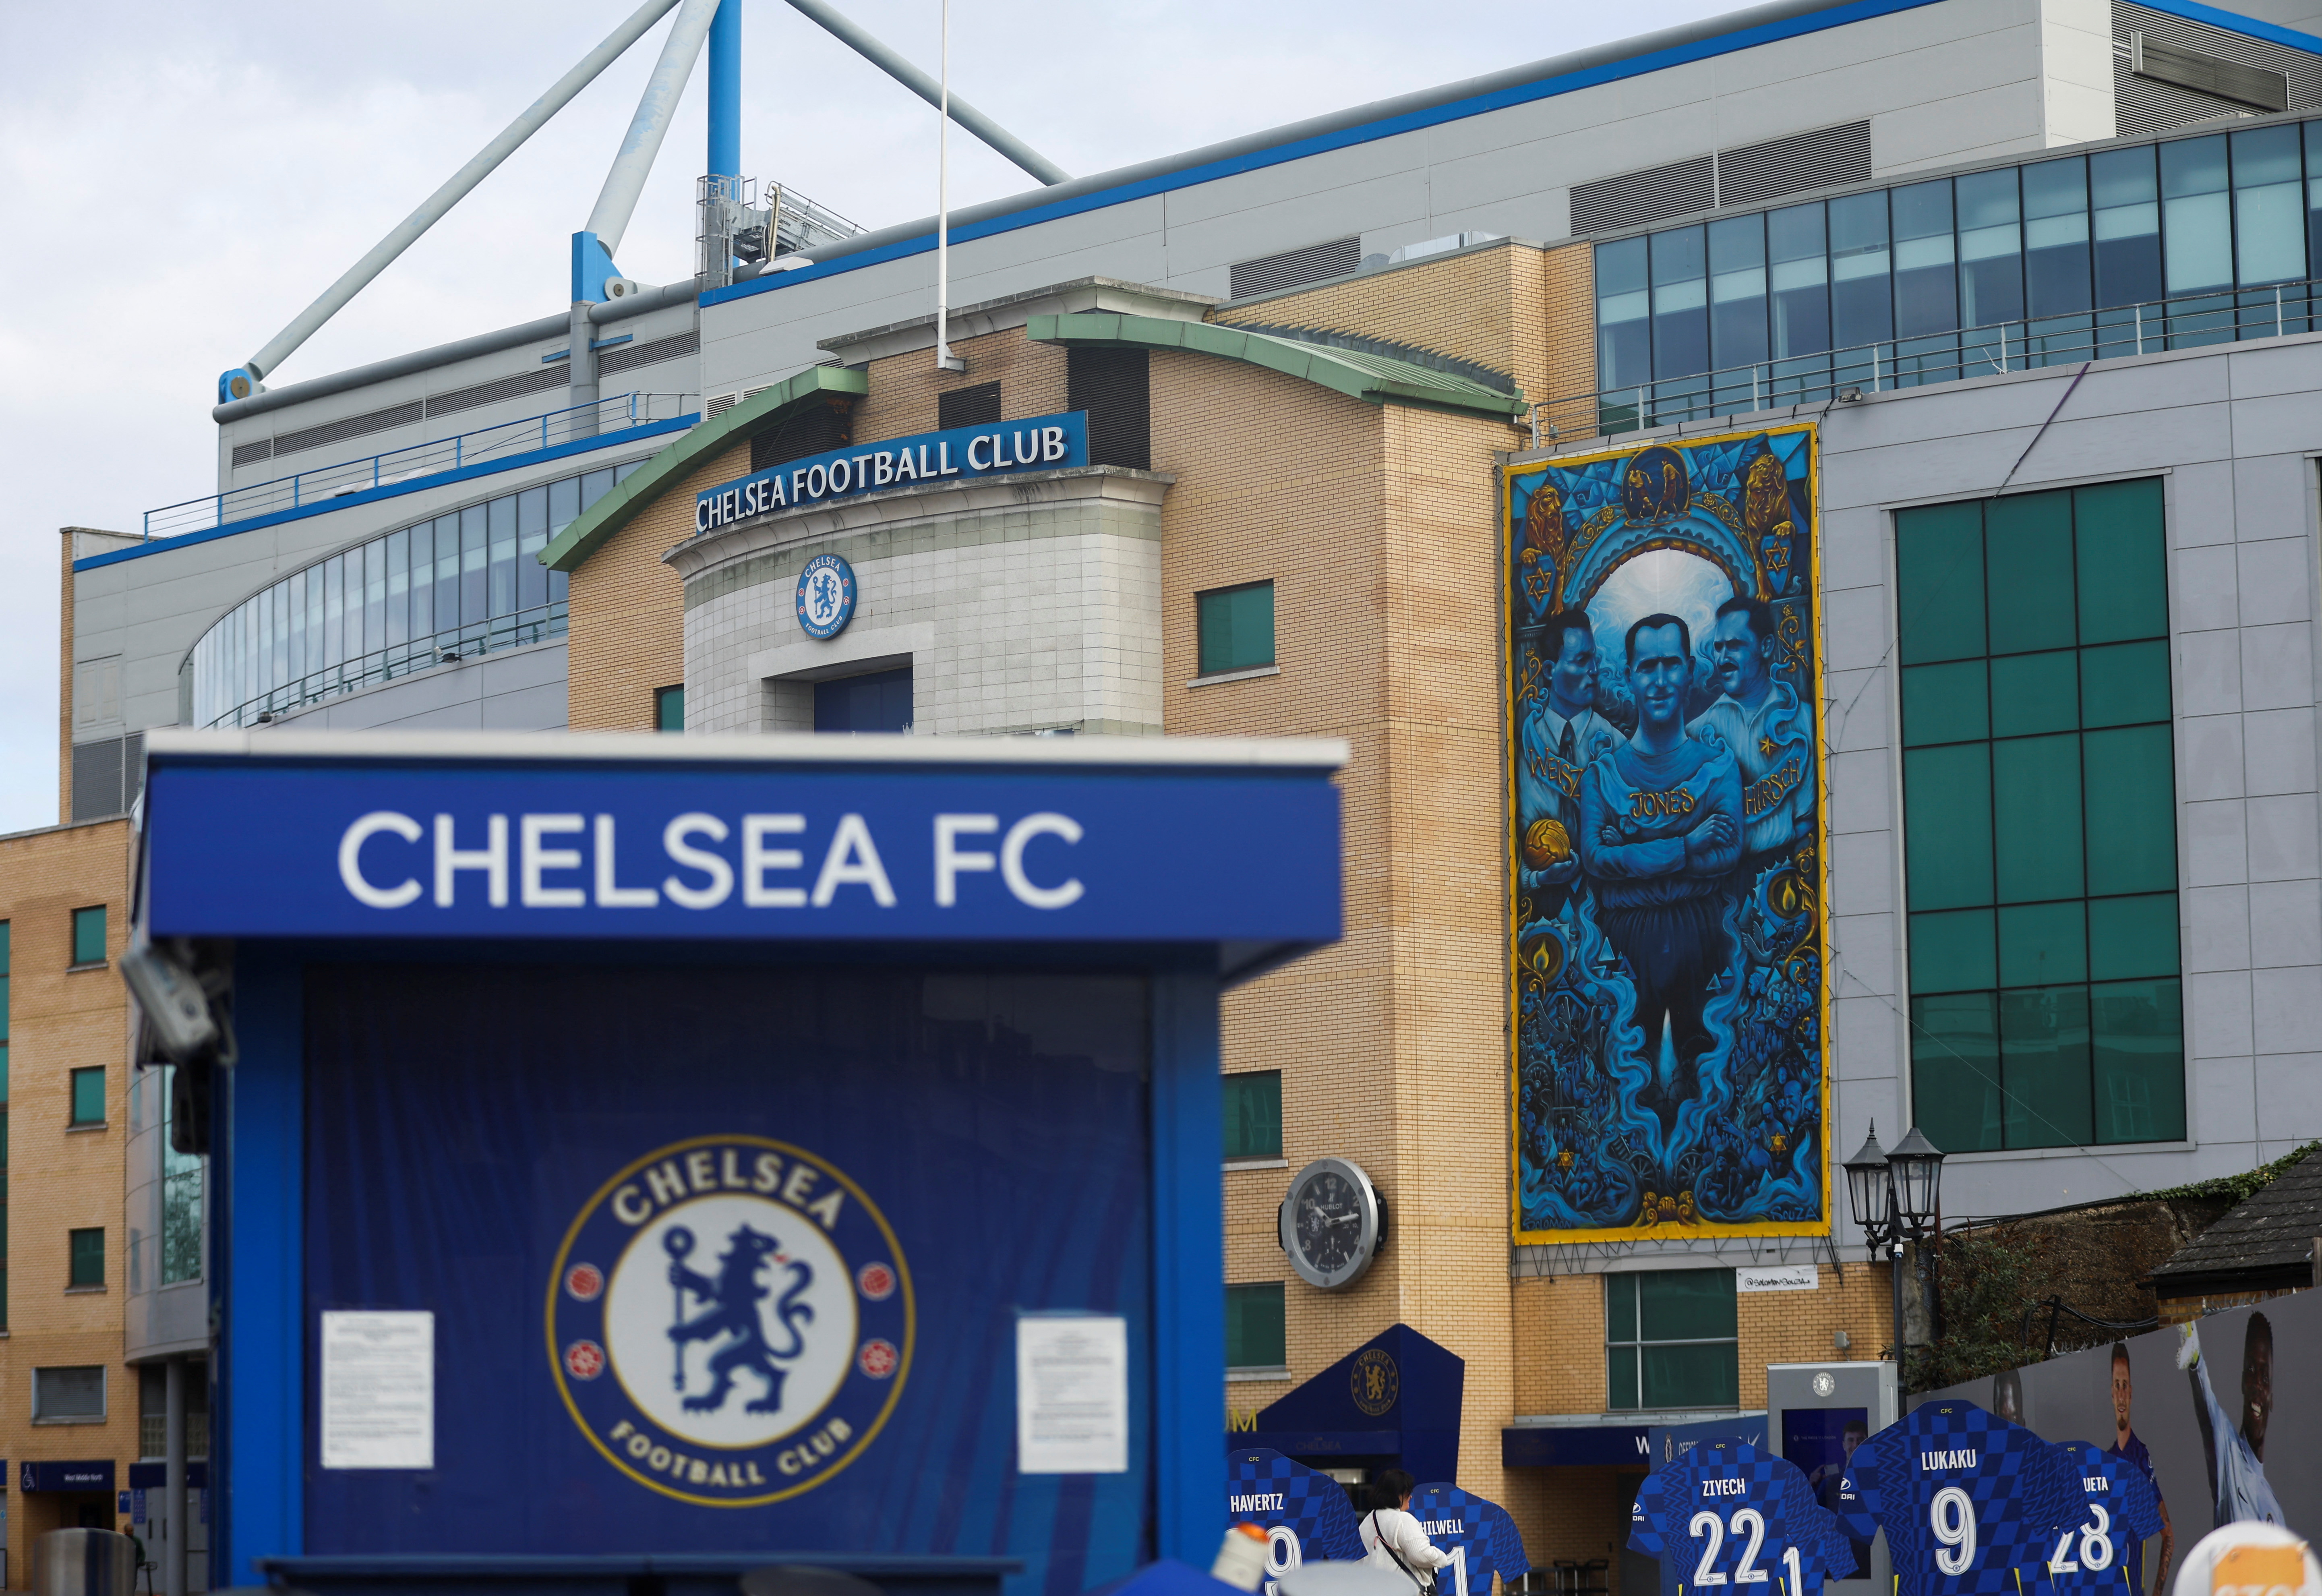 Views outside Chelsea FC after Britain imposed sanctions on its Russian owner, Roman Abramovich